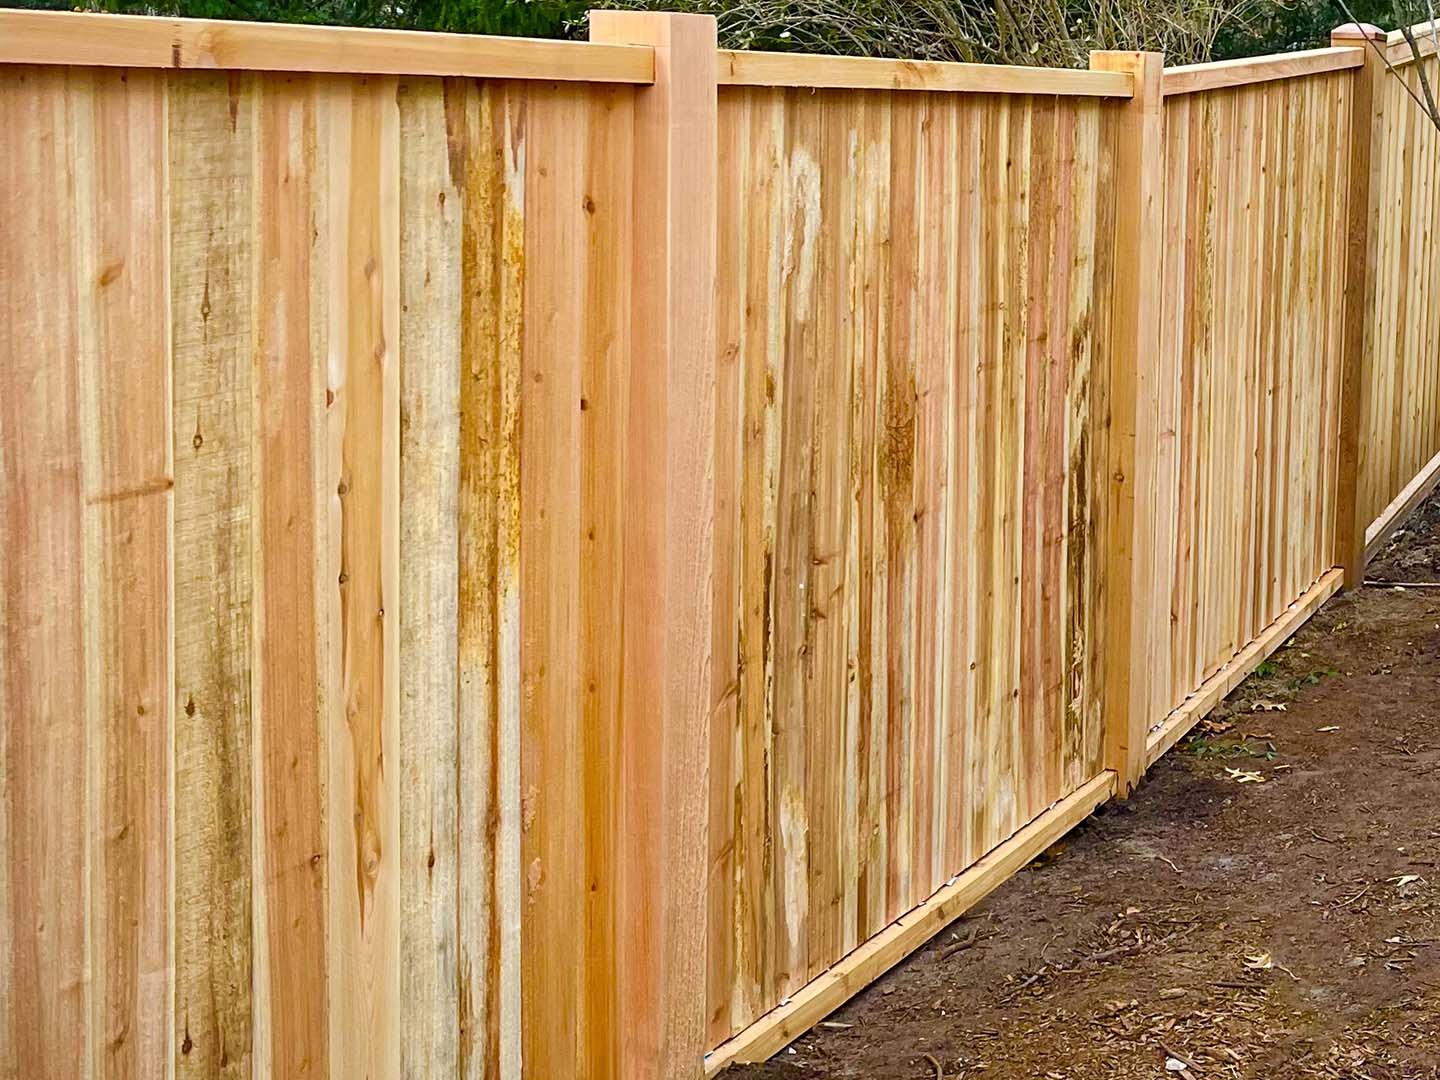 Hebron IN cap and trim style wood fence